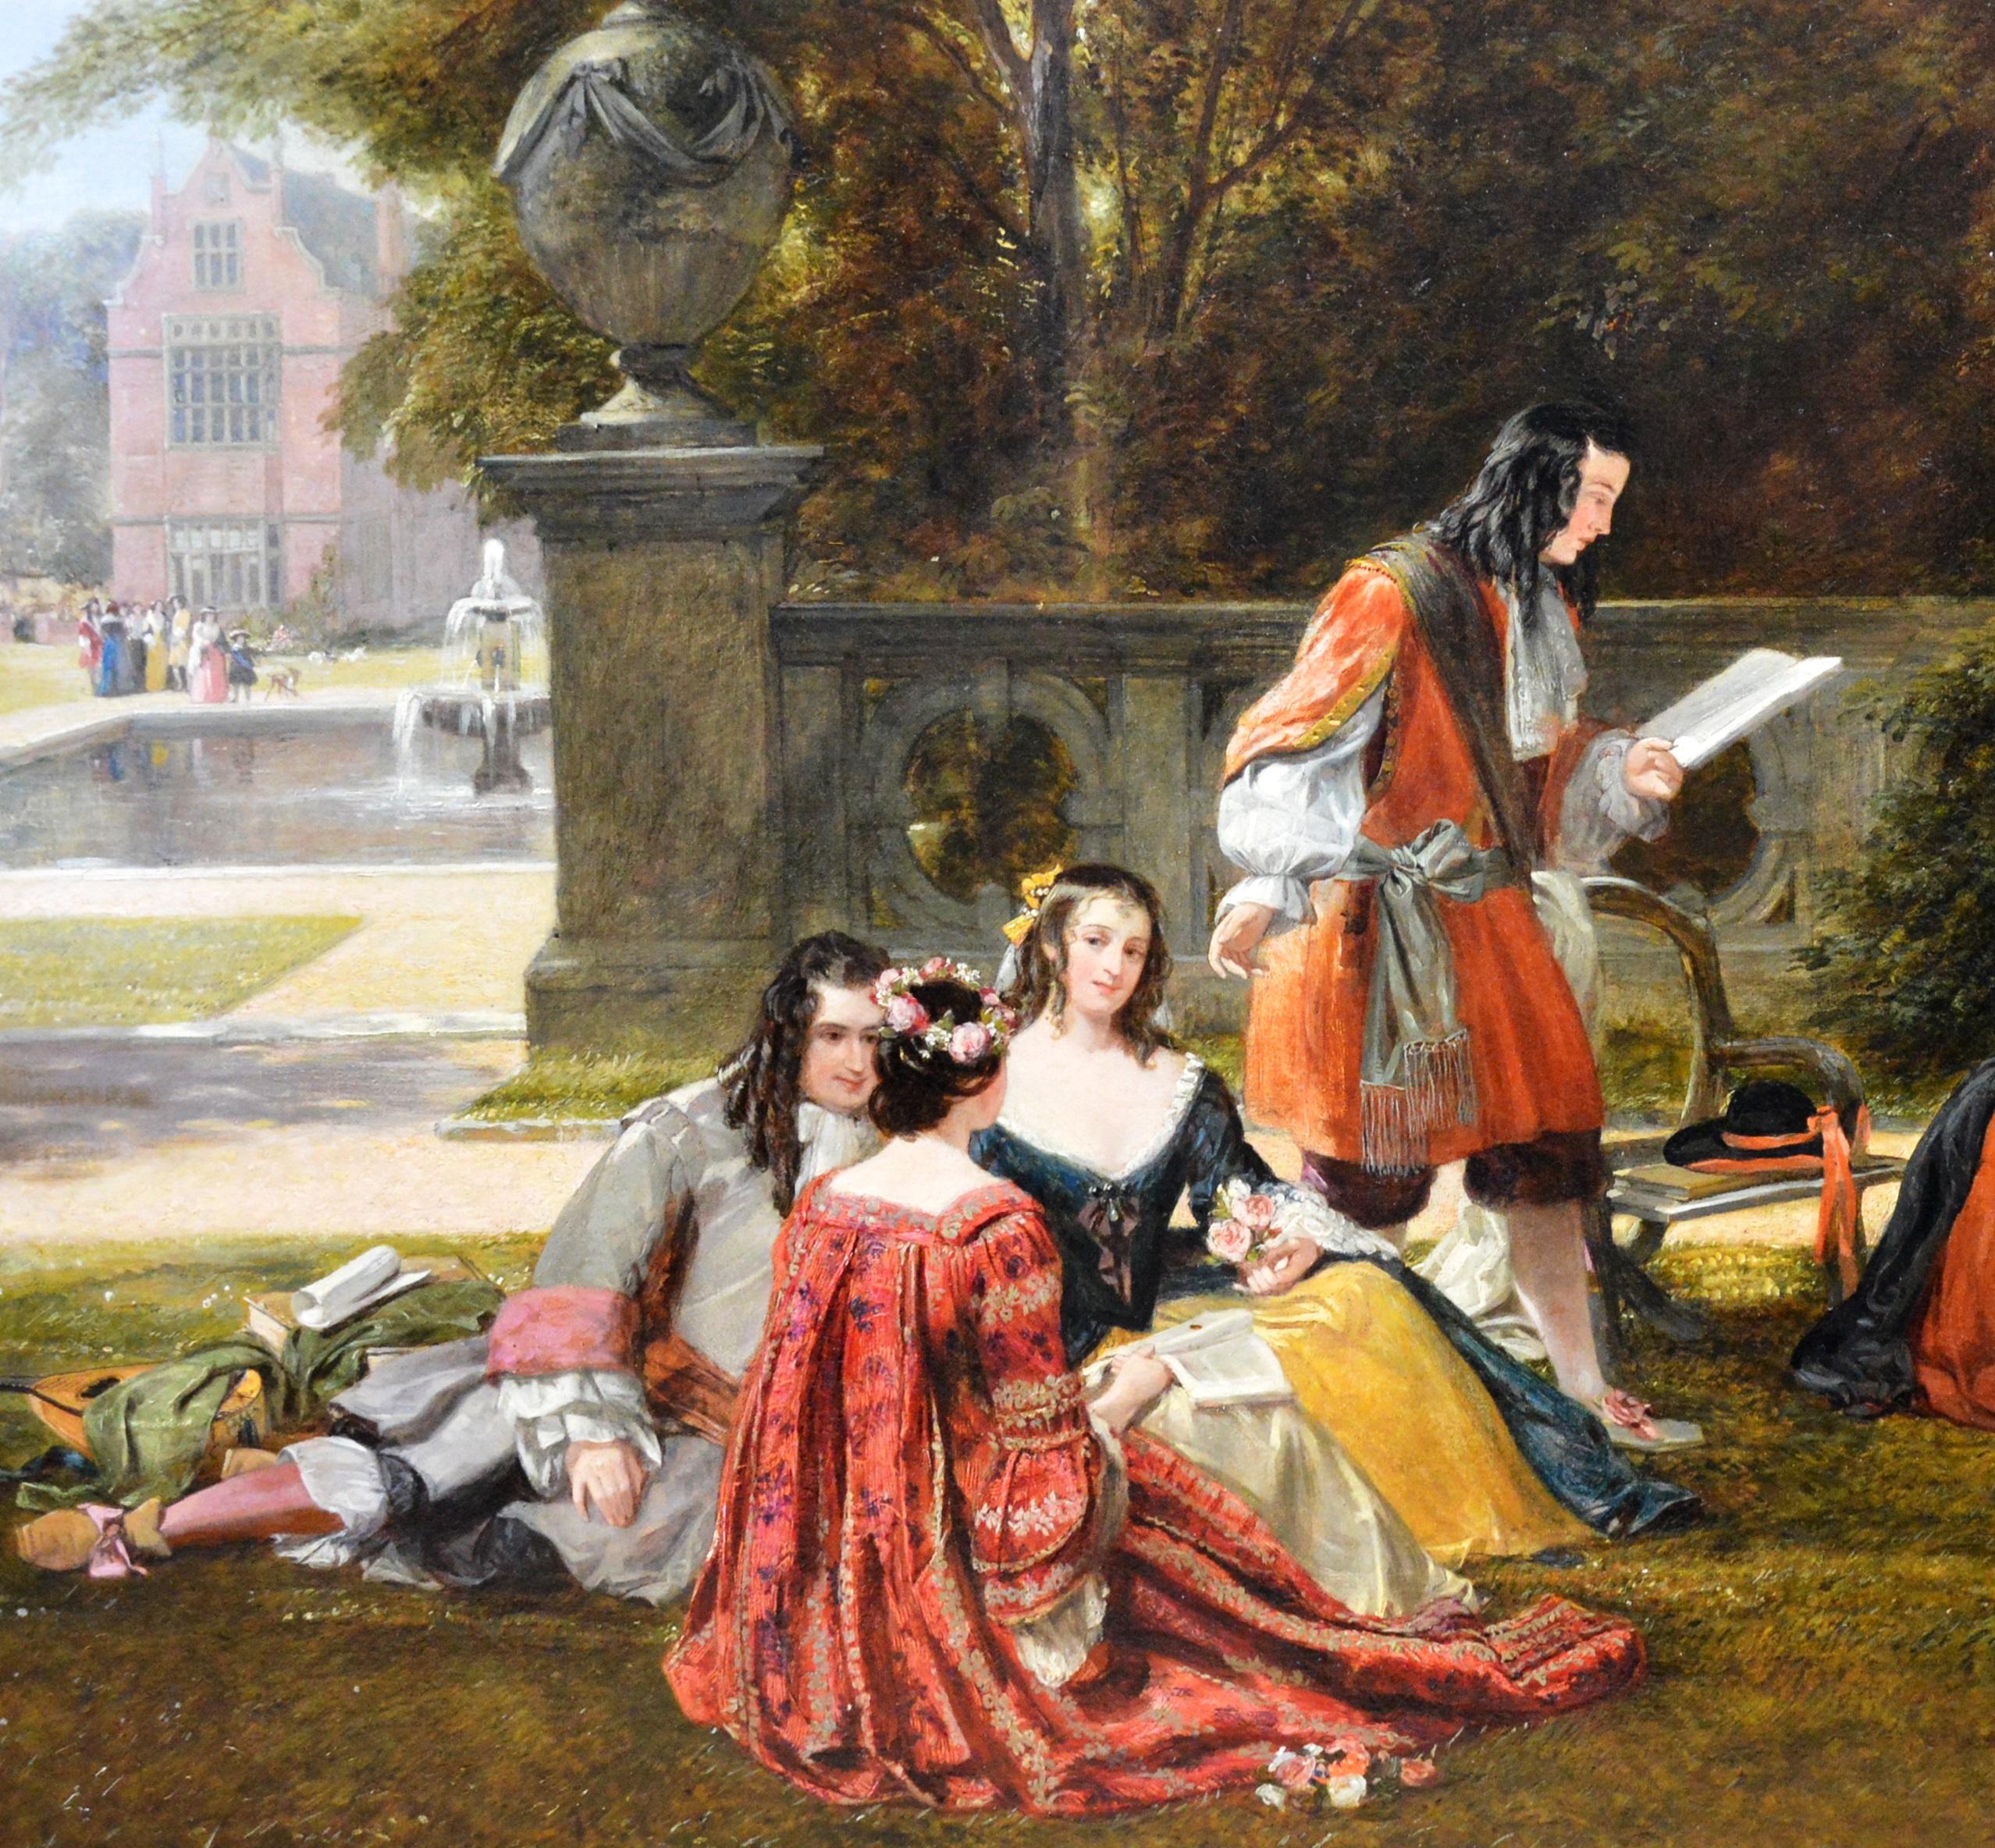 ‘Summer Hill, time of Charles II’ by James Digman Wingfield (1800-1872). This very large 19th century oil on canvas depicts the royal court of King Charles II in the gardens of an English stately home is signed by the artist and dated 1855, in which